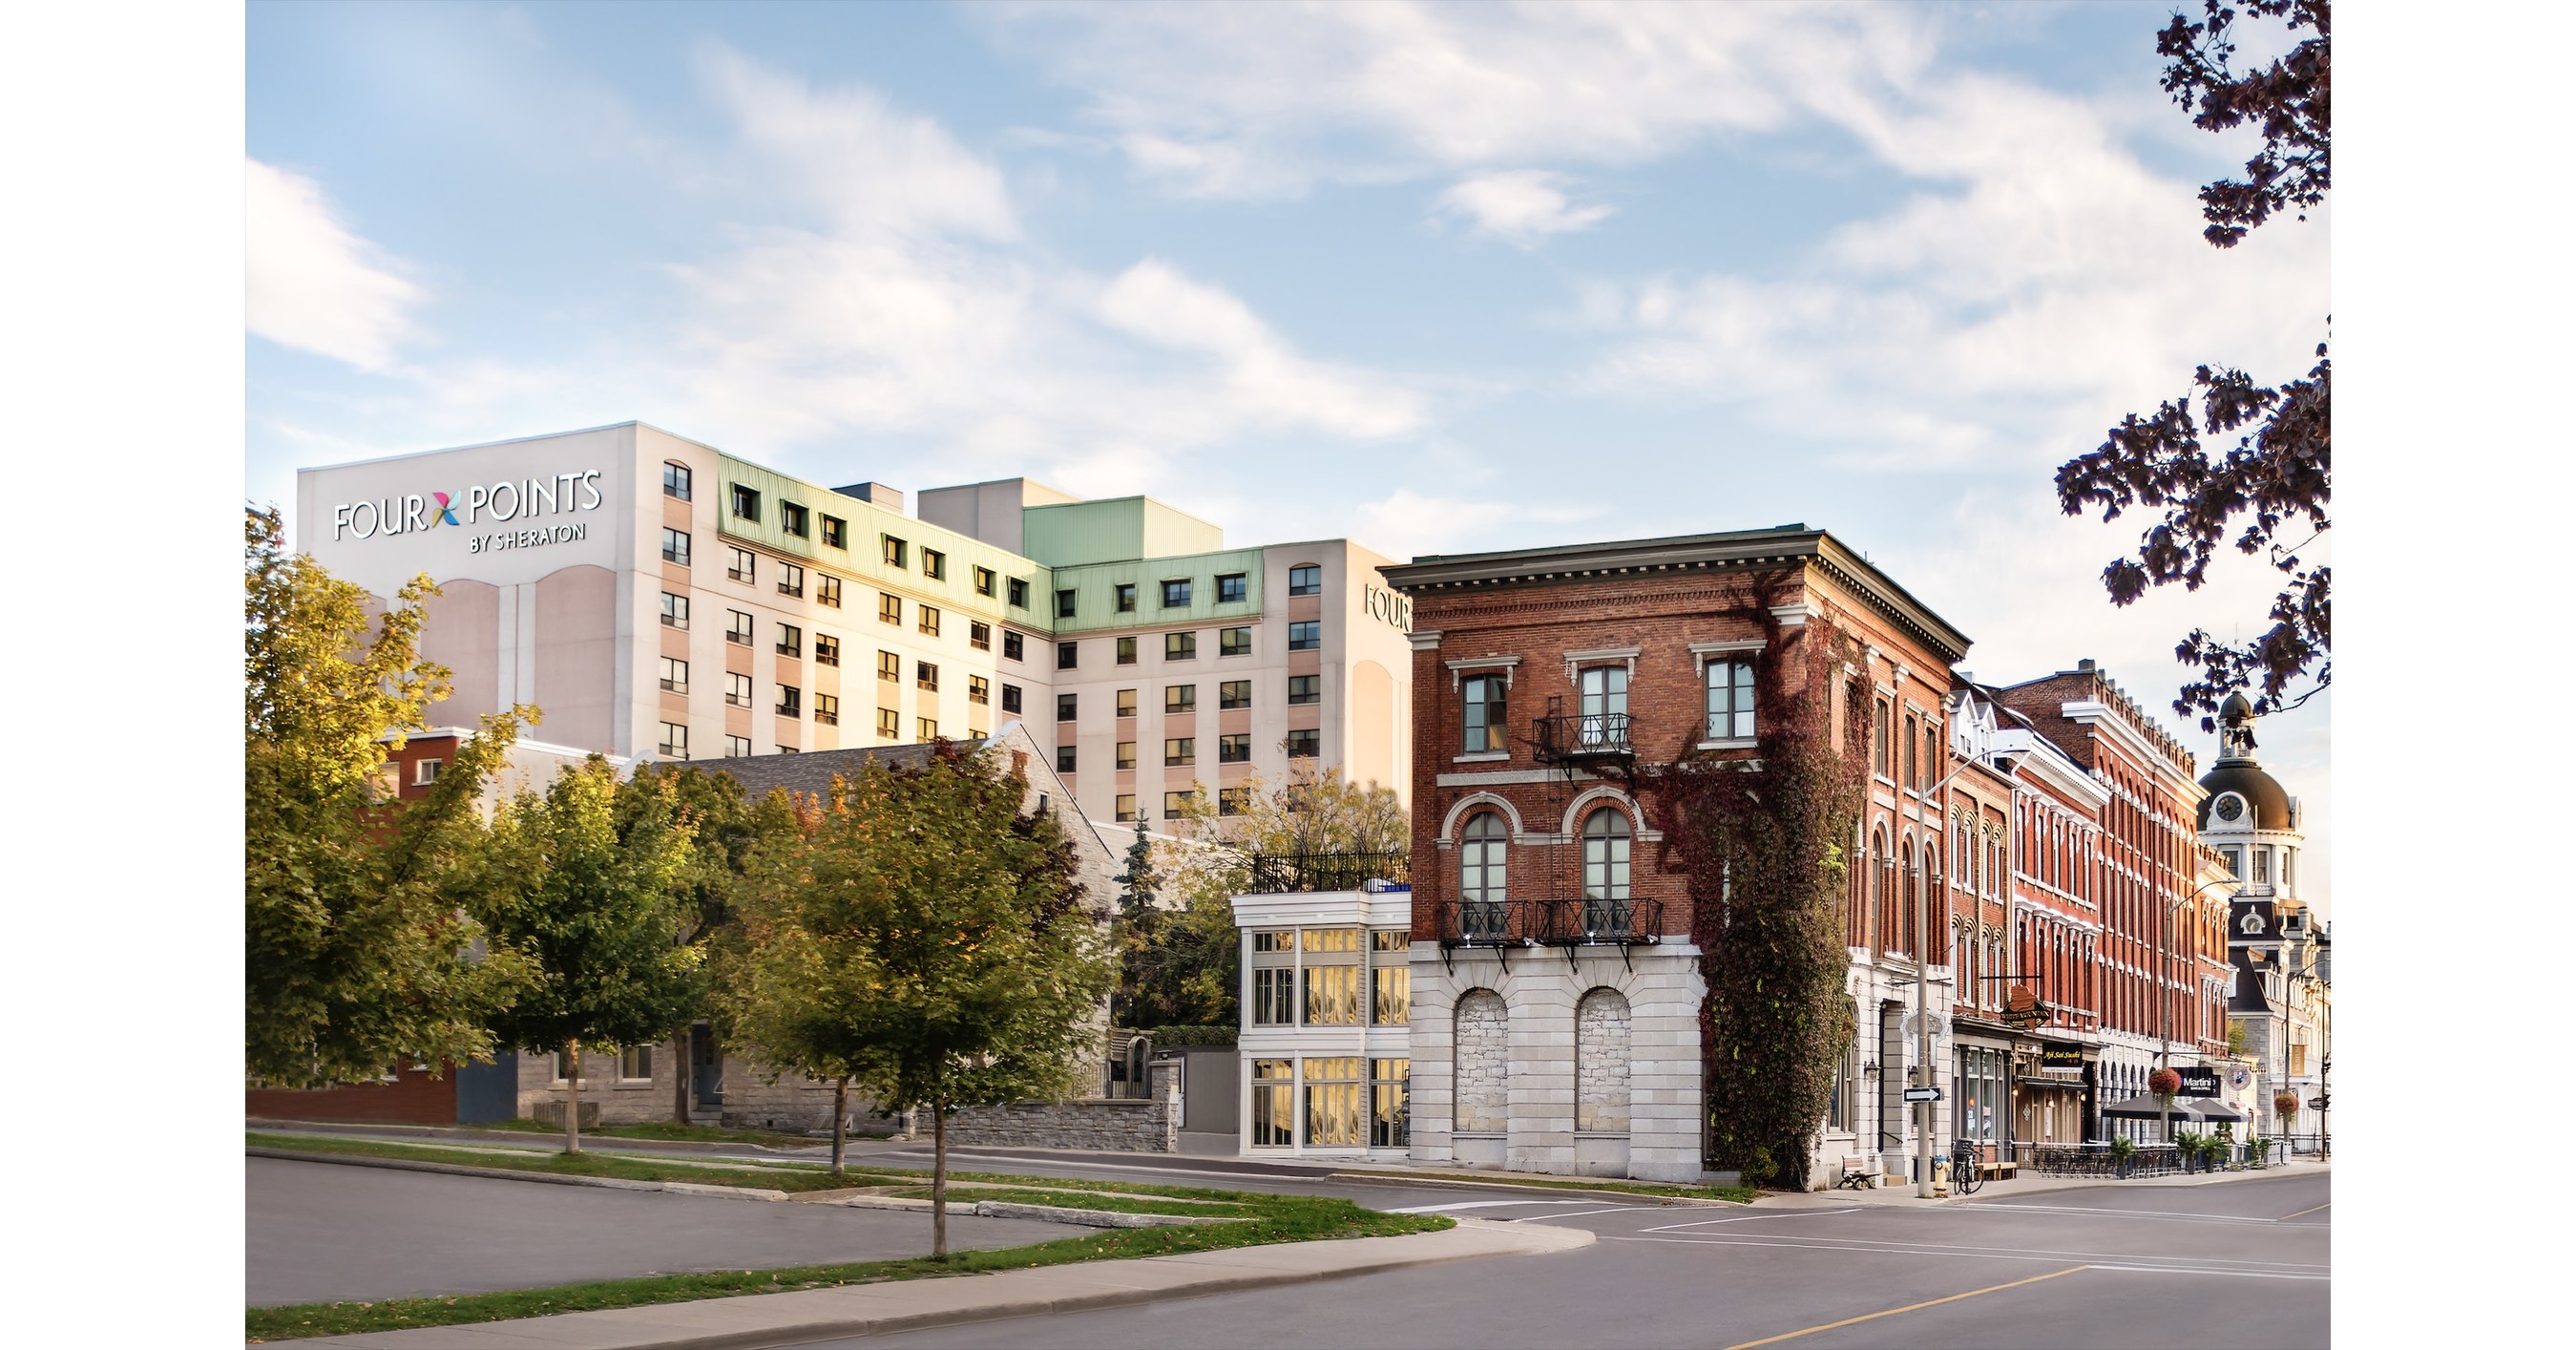 Easton's Group of Hotels Acquires Four Points by Sheraton Kingston